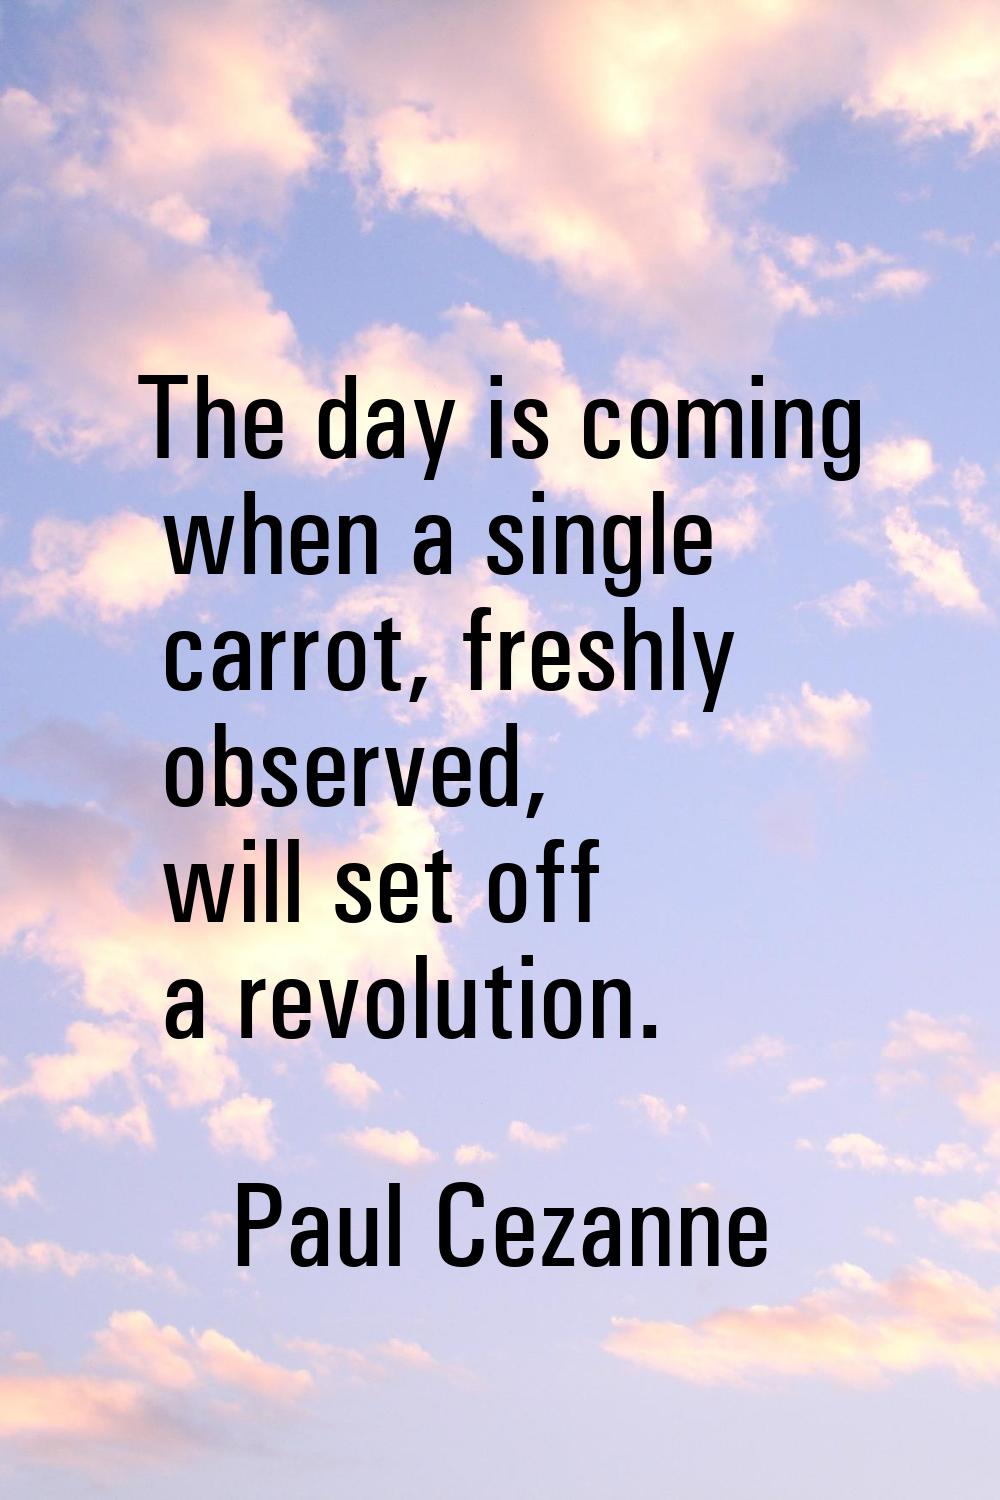 The day is coming when a single carrot, freshly observed, will set off a revolution.